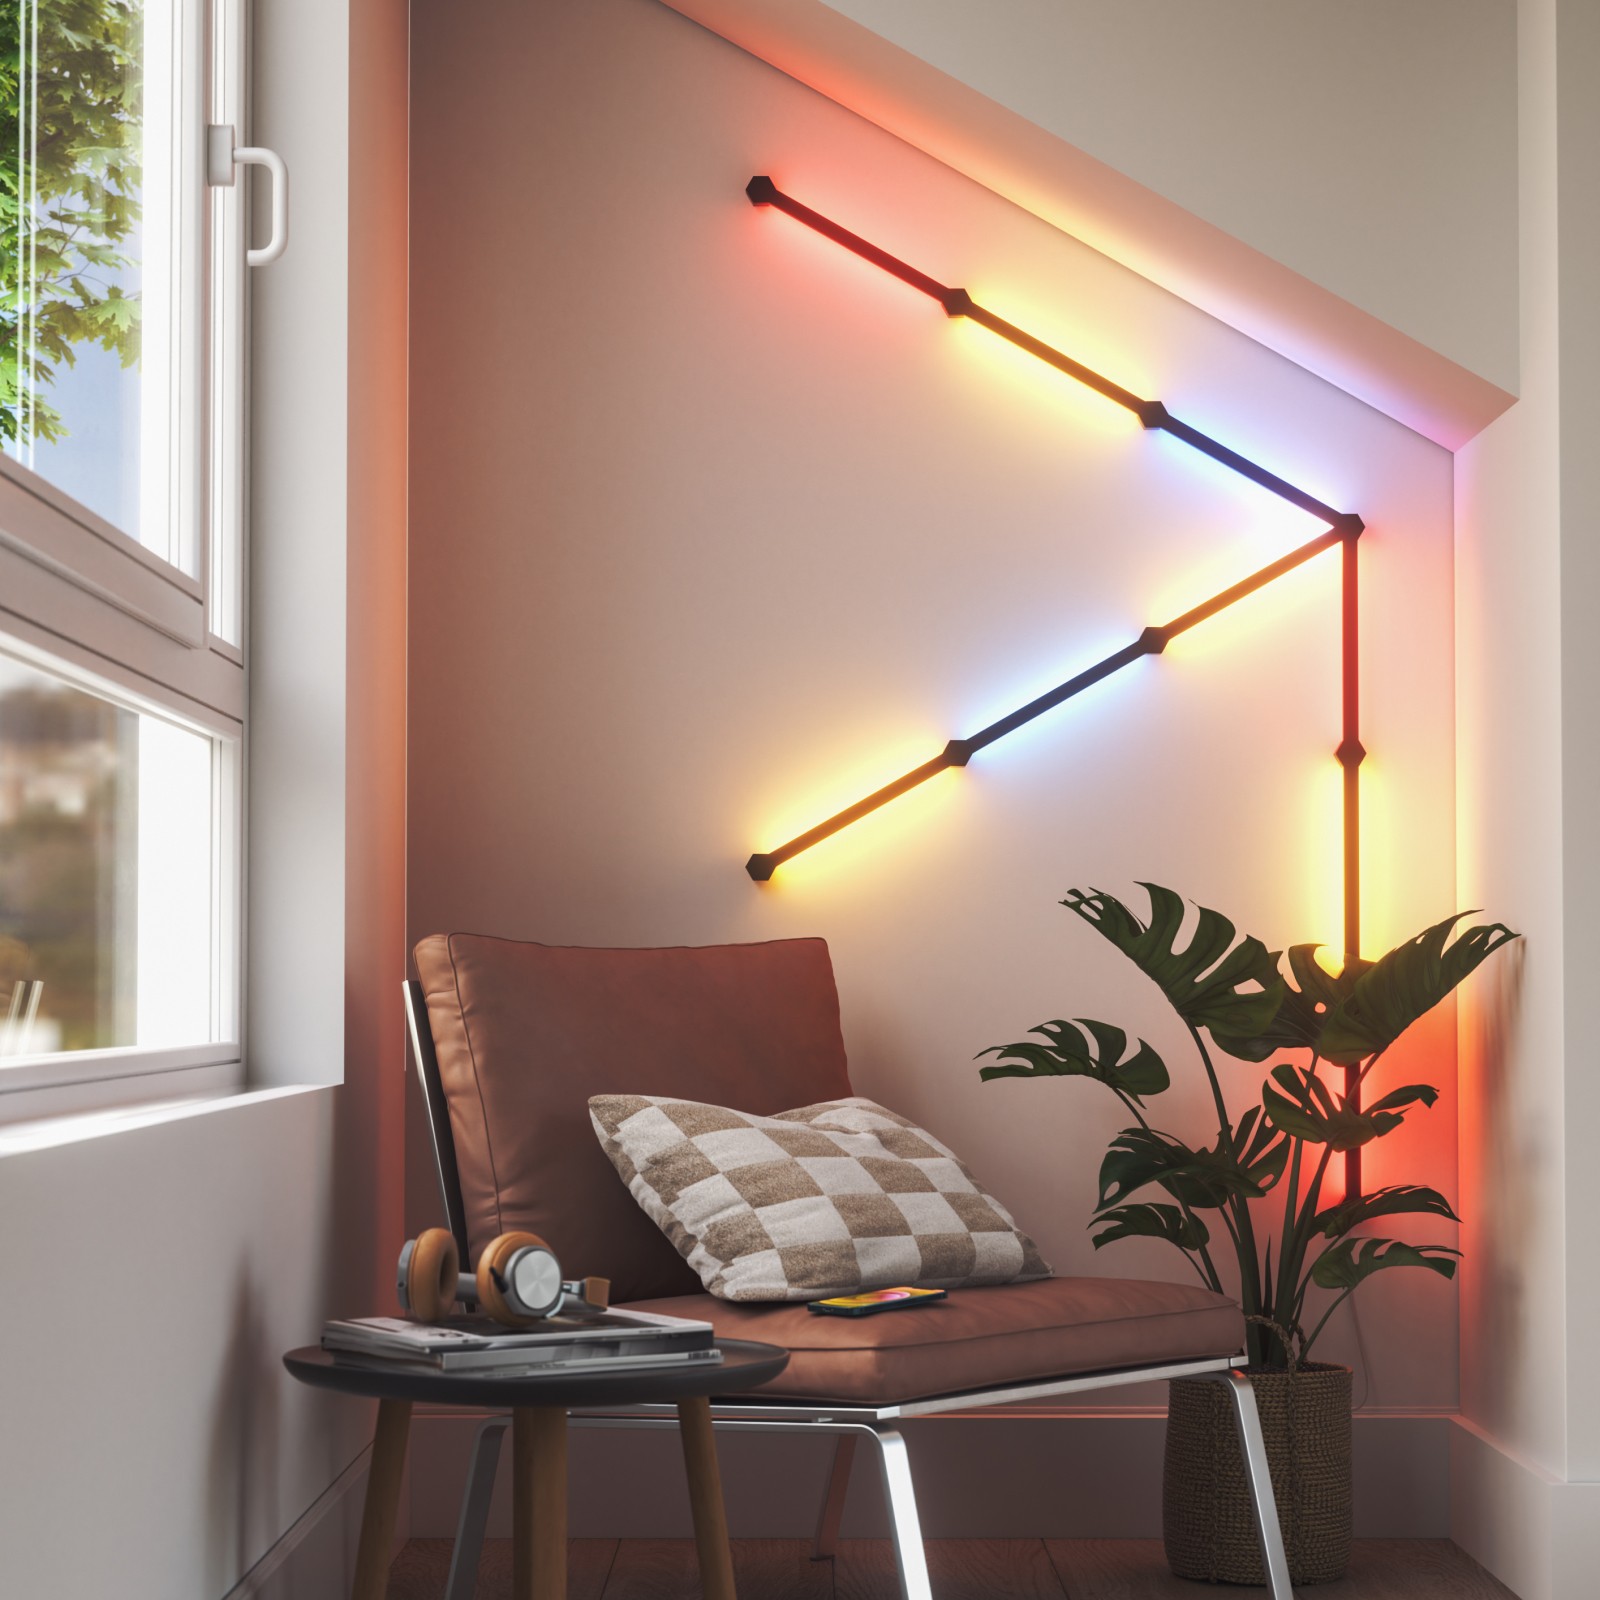 Shop Products | Nanoleaf » United States » Consumer IoT & LED Smart  Lighting Products